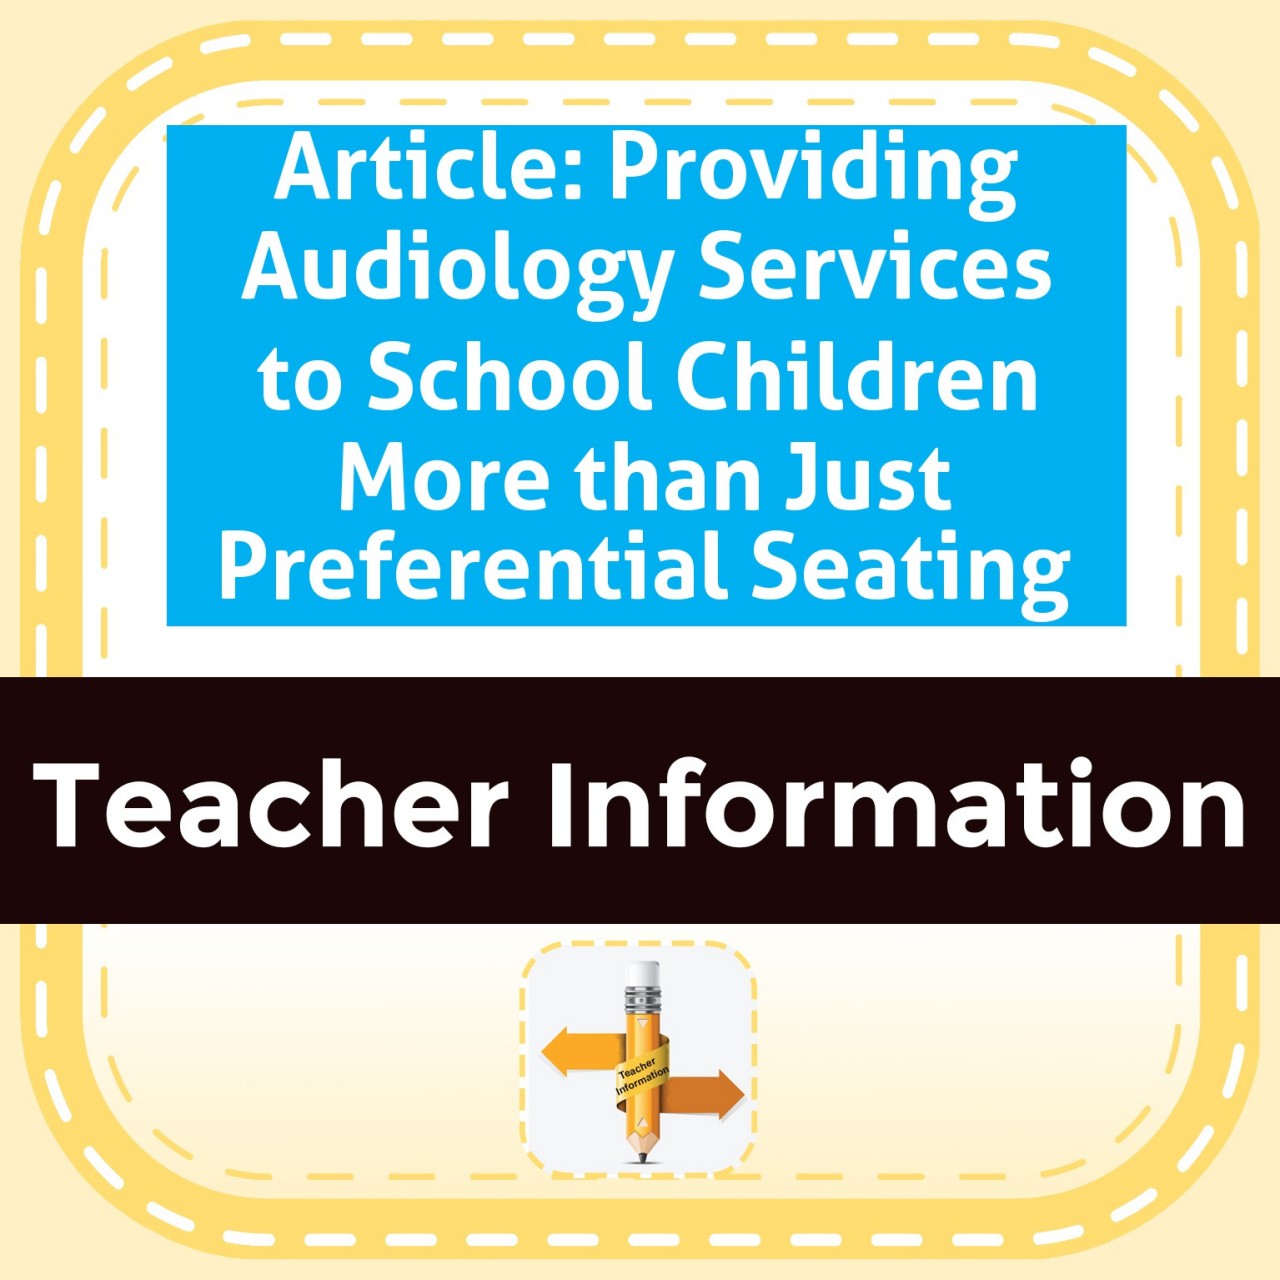 Article: Providing Audiology Services to School Children More than Just Preferential Seating